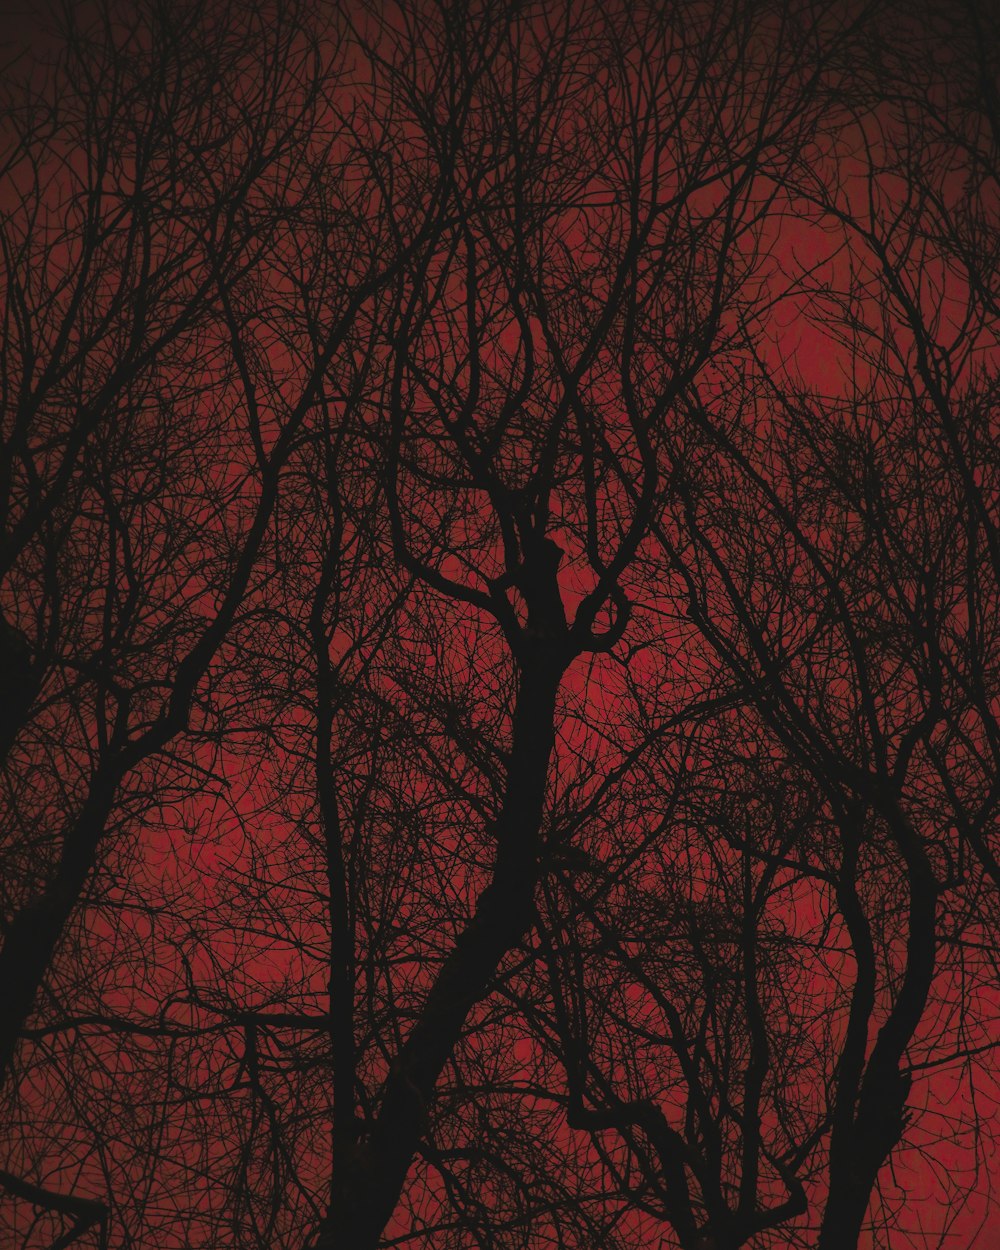 a red sky with some trees in the foreground